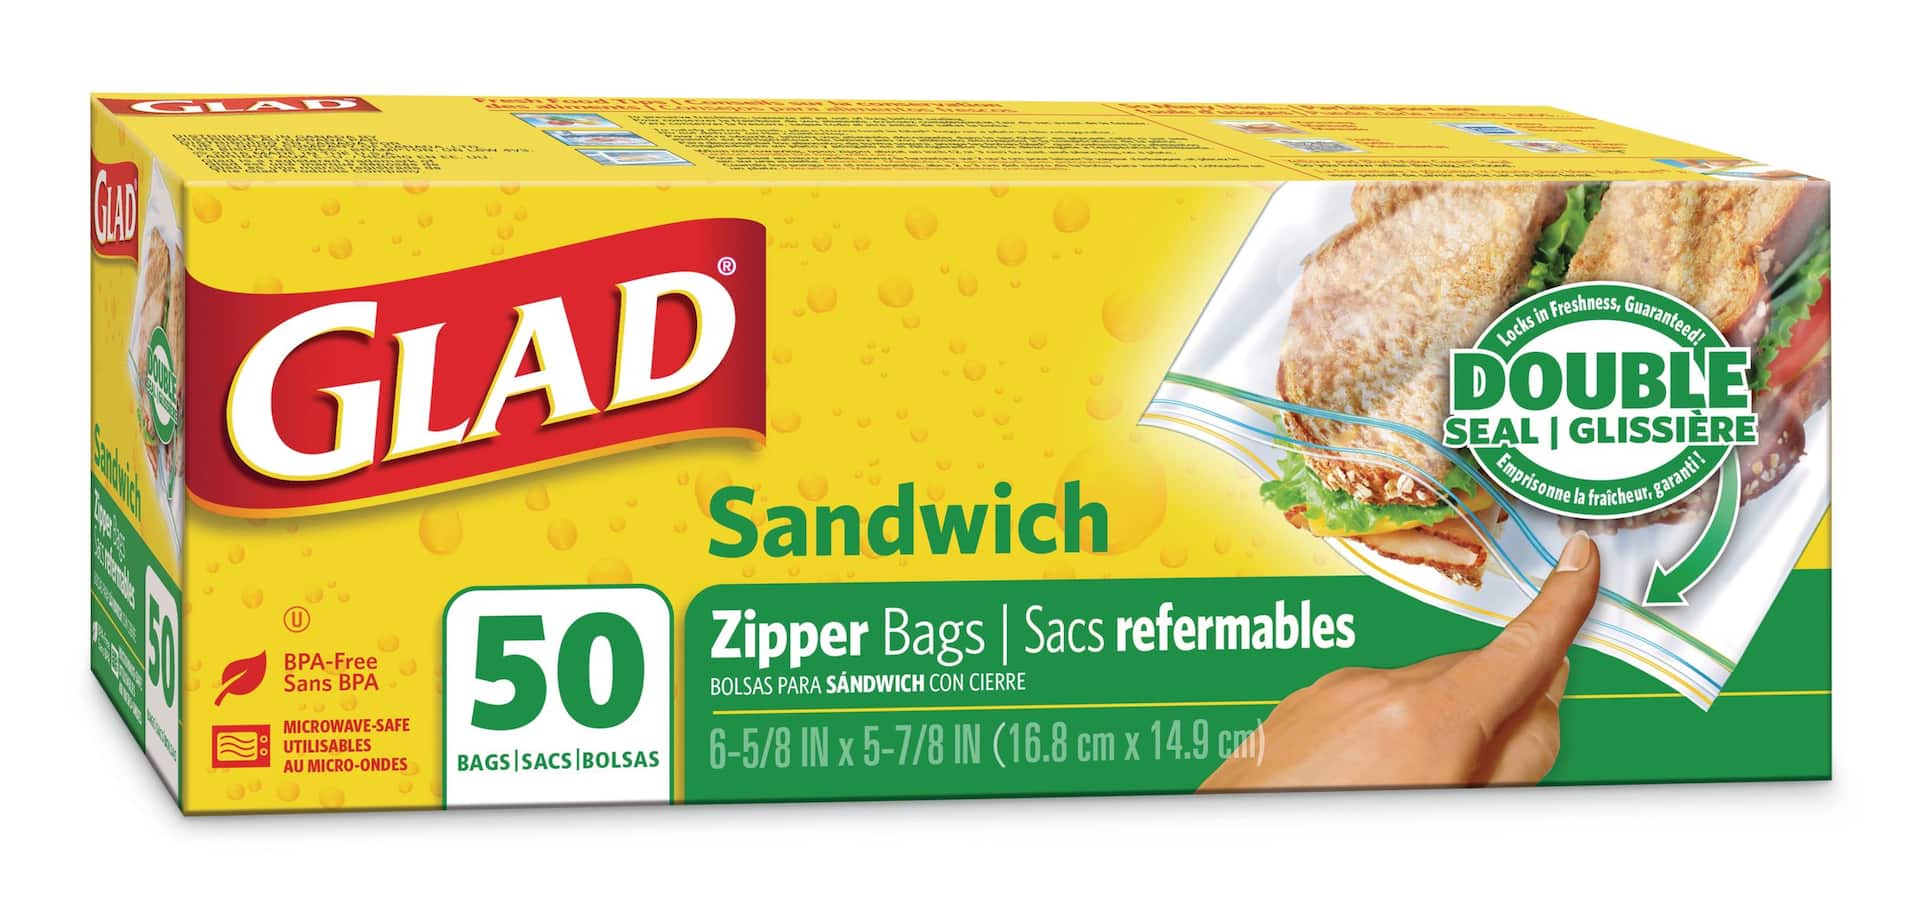 https://media-www.canadiantire.ca/product/living/home-essentials/household-consumables/0992216/glad-zipper-sandwich-bags-50-pack-79e8d451-85f7-44ea-bfb6-6feee78c126f-jpgrendition.jpg